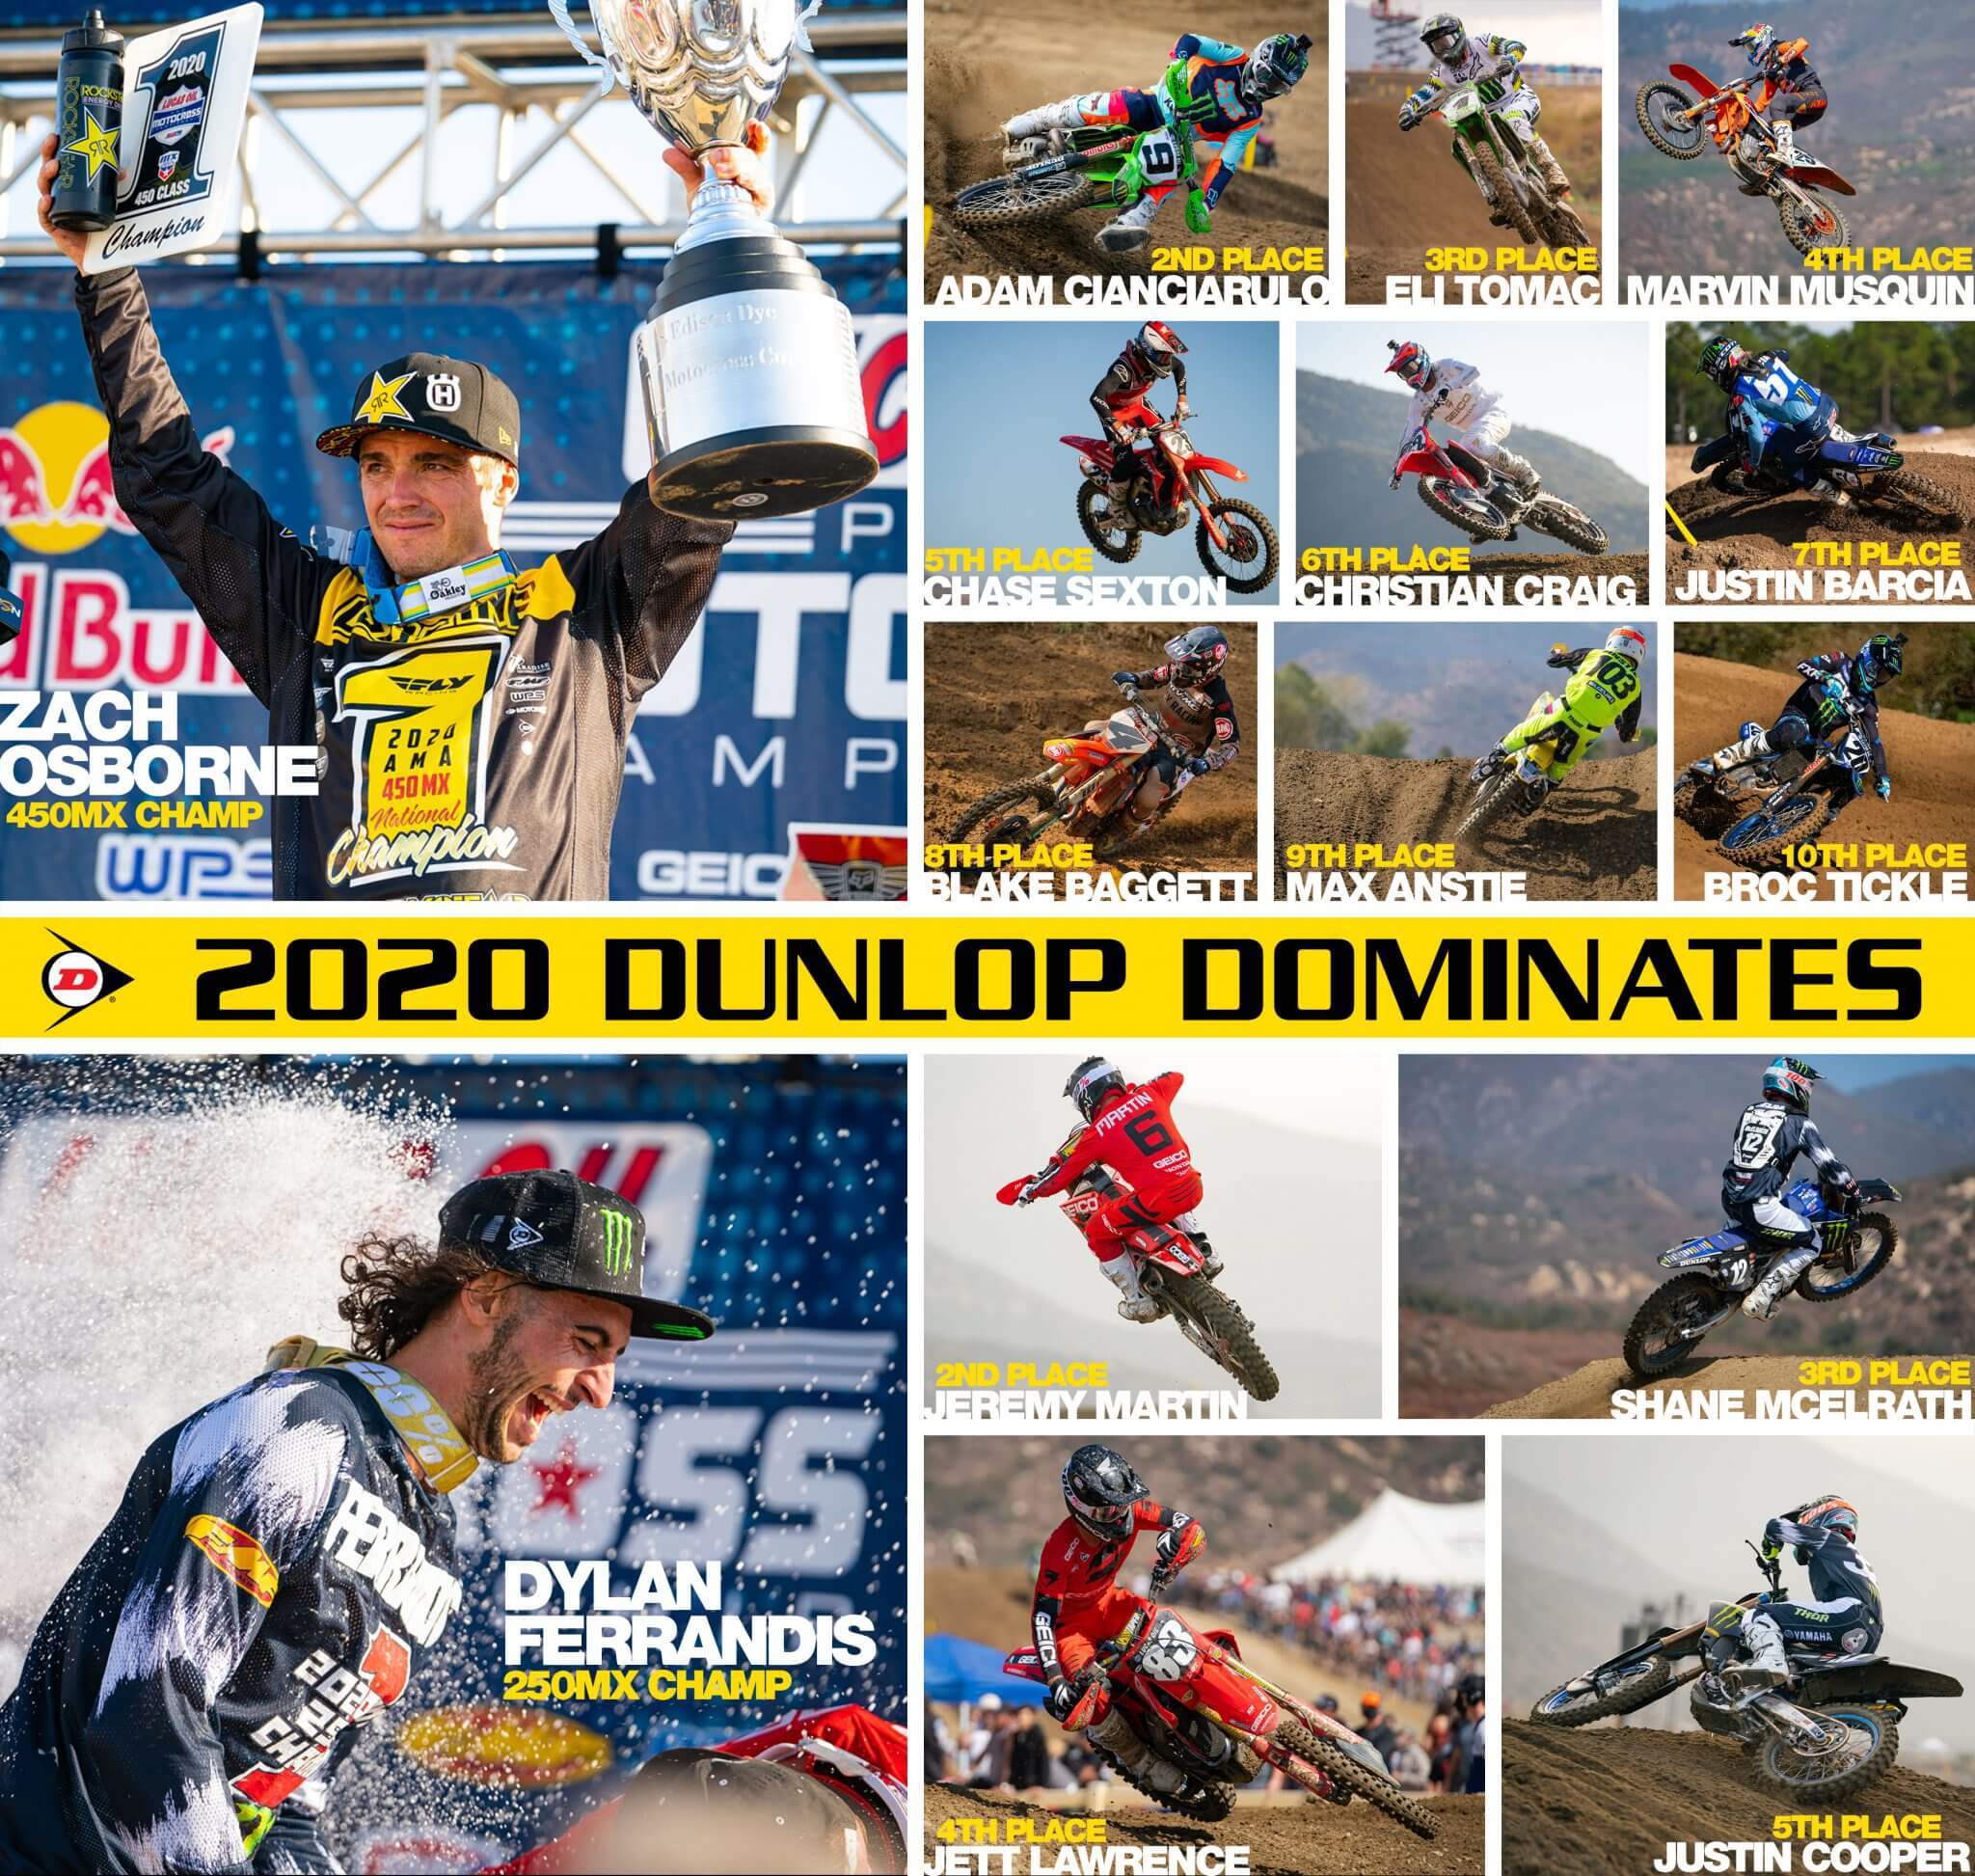 Read This Controversial Article And Find Out More About motocross